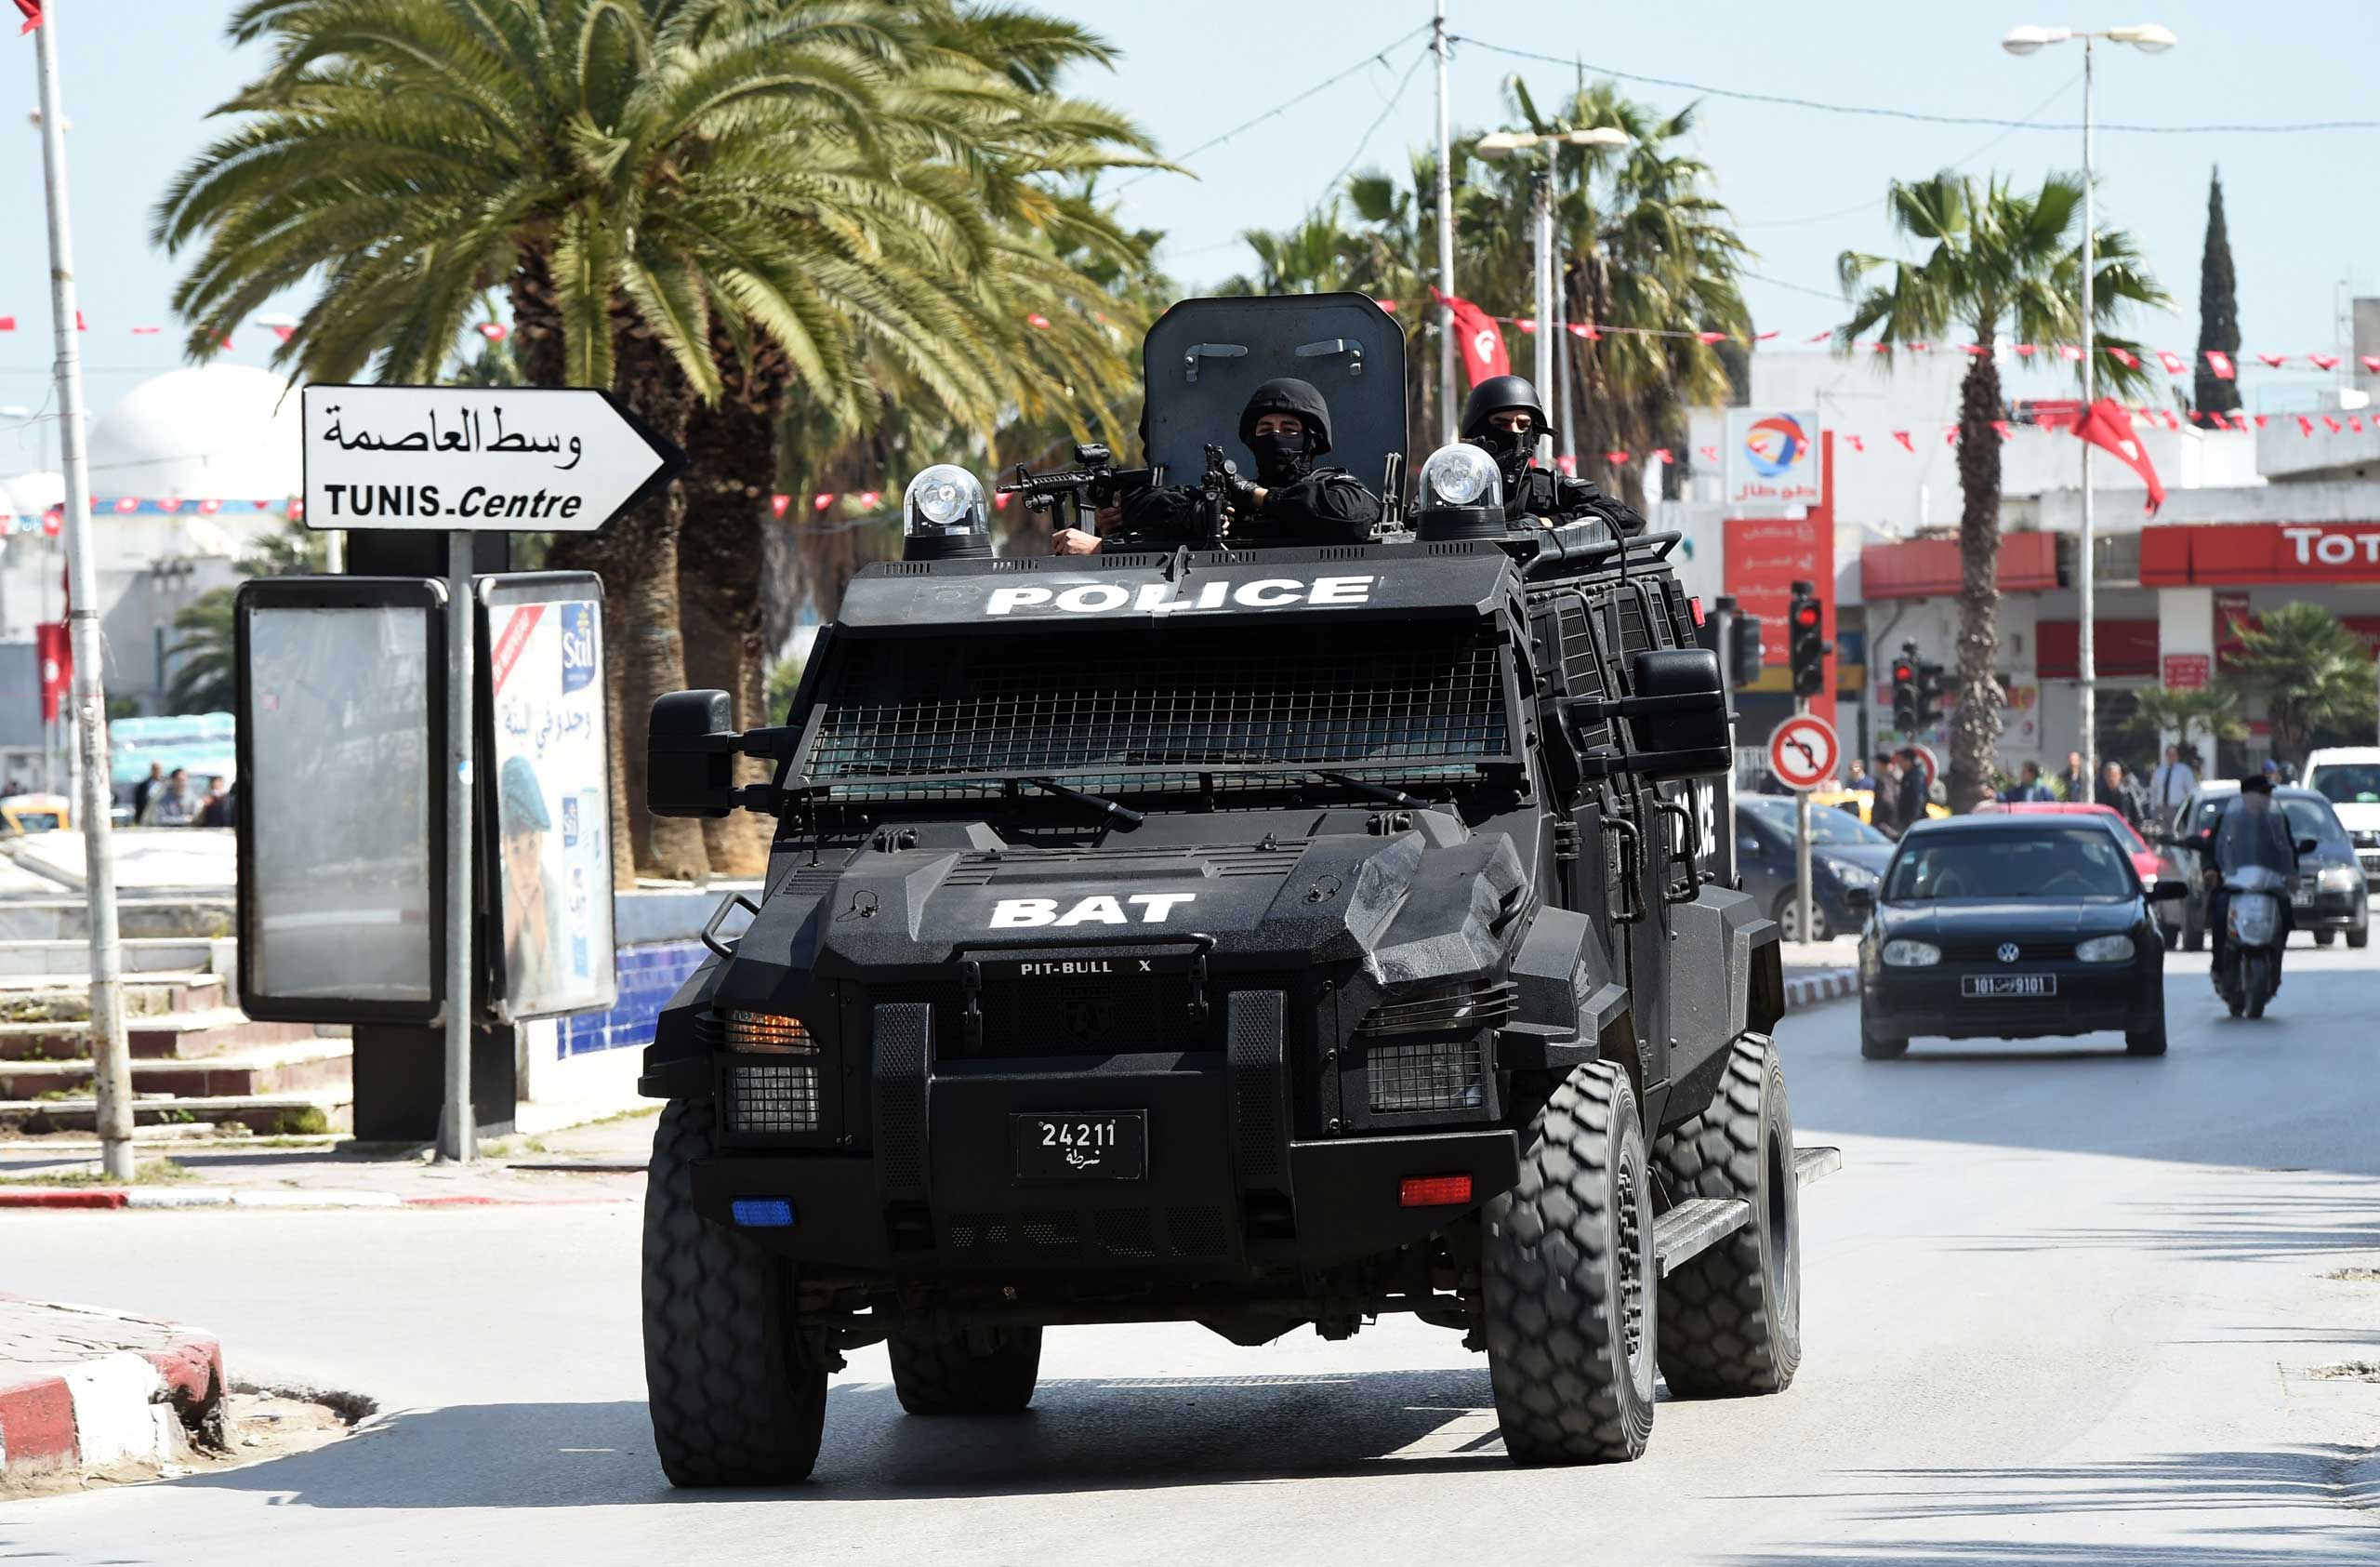 Tunisian security forces secure the area after gunmen attacked the Bardo Museum in Tunis on March 18, 2015.